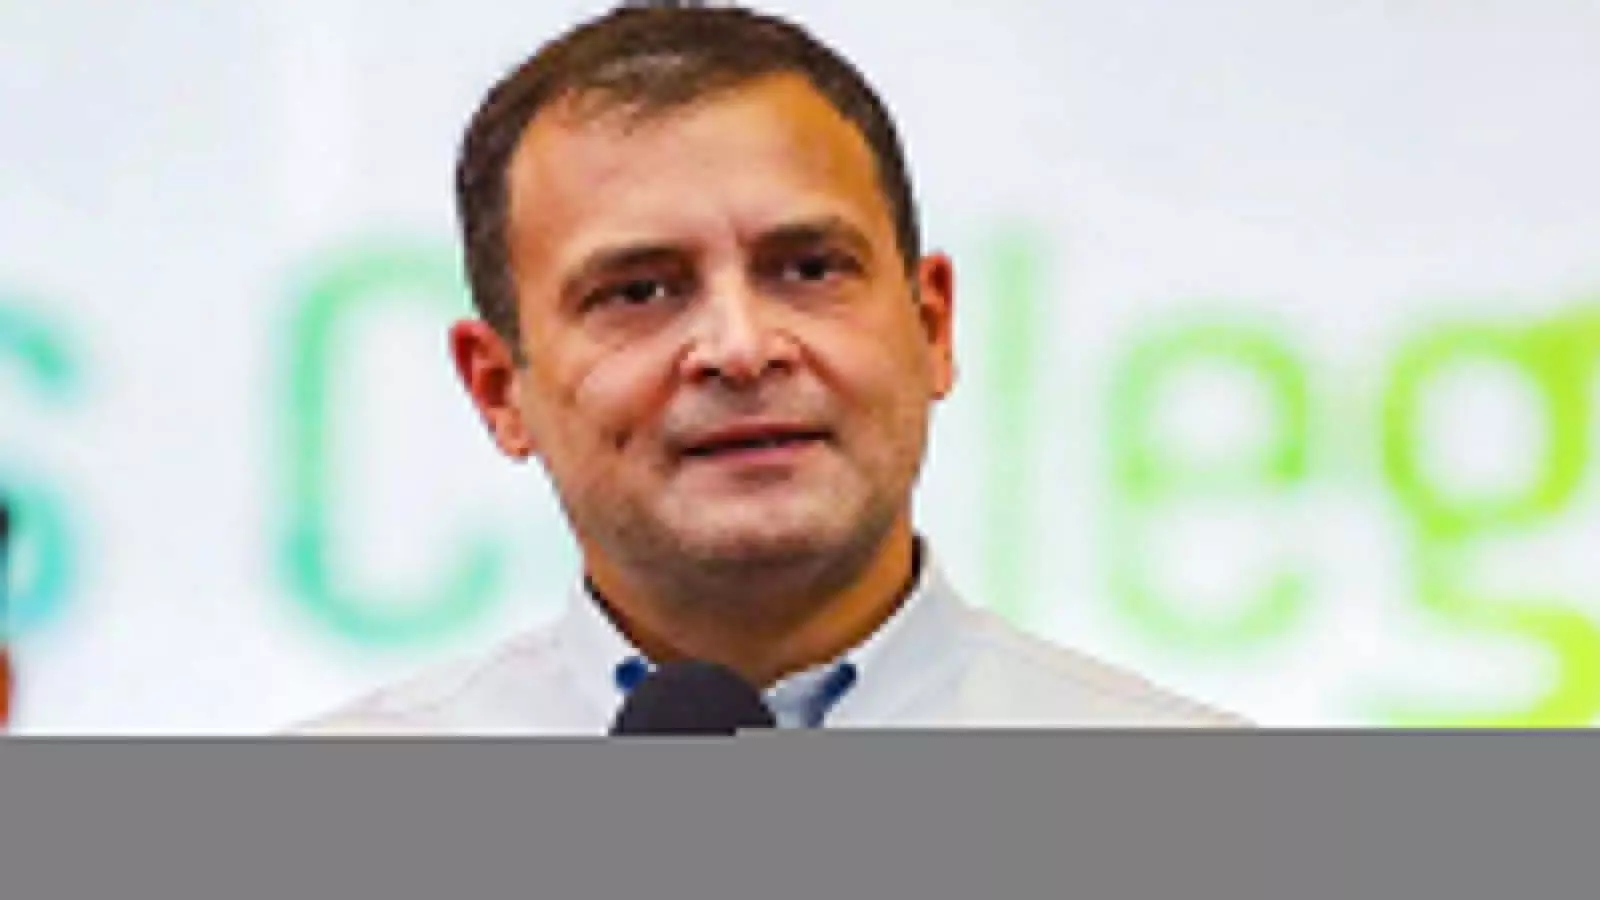 Failed policies led to Covid-19 second wave: Rahul Gandhis another jibe at Centre